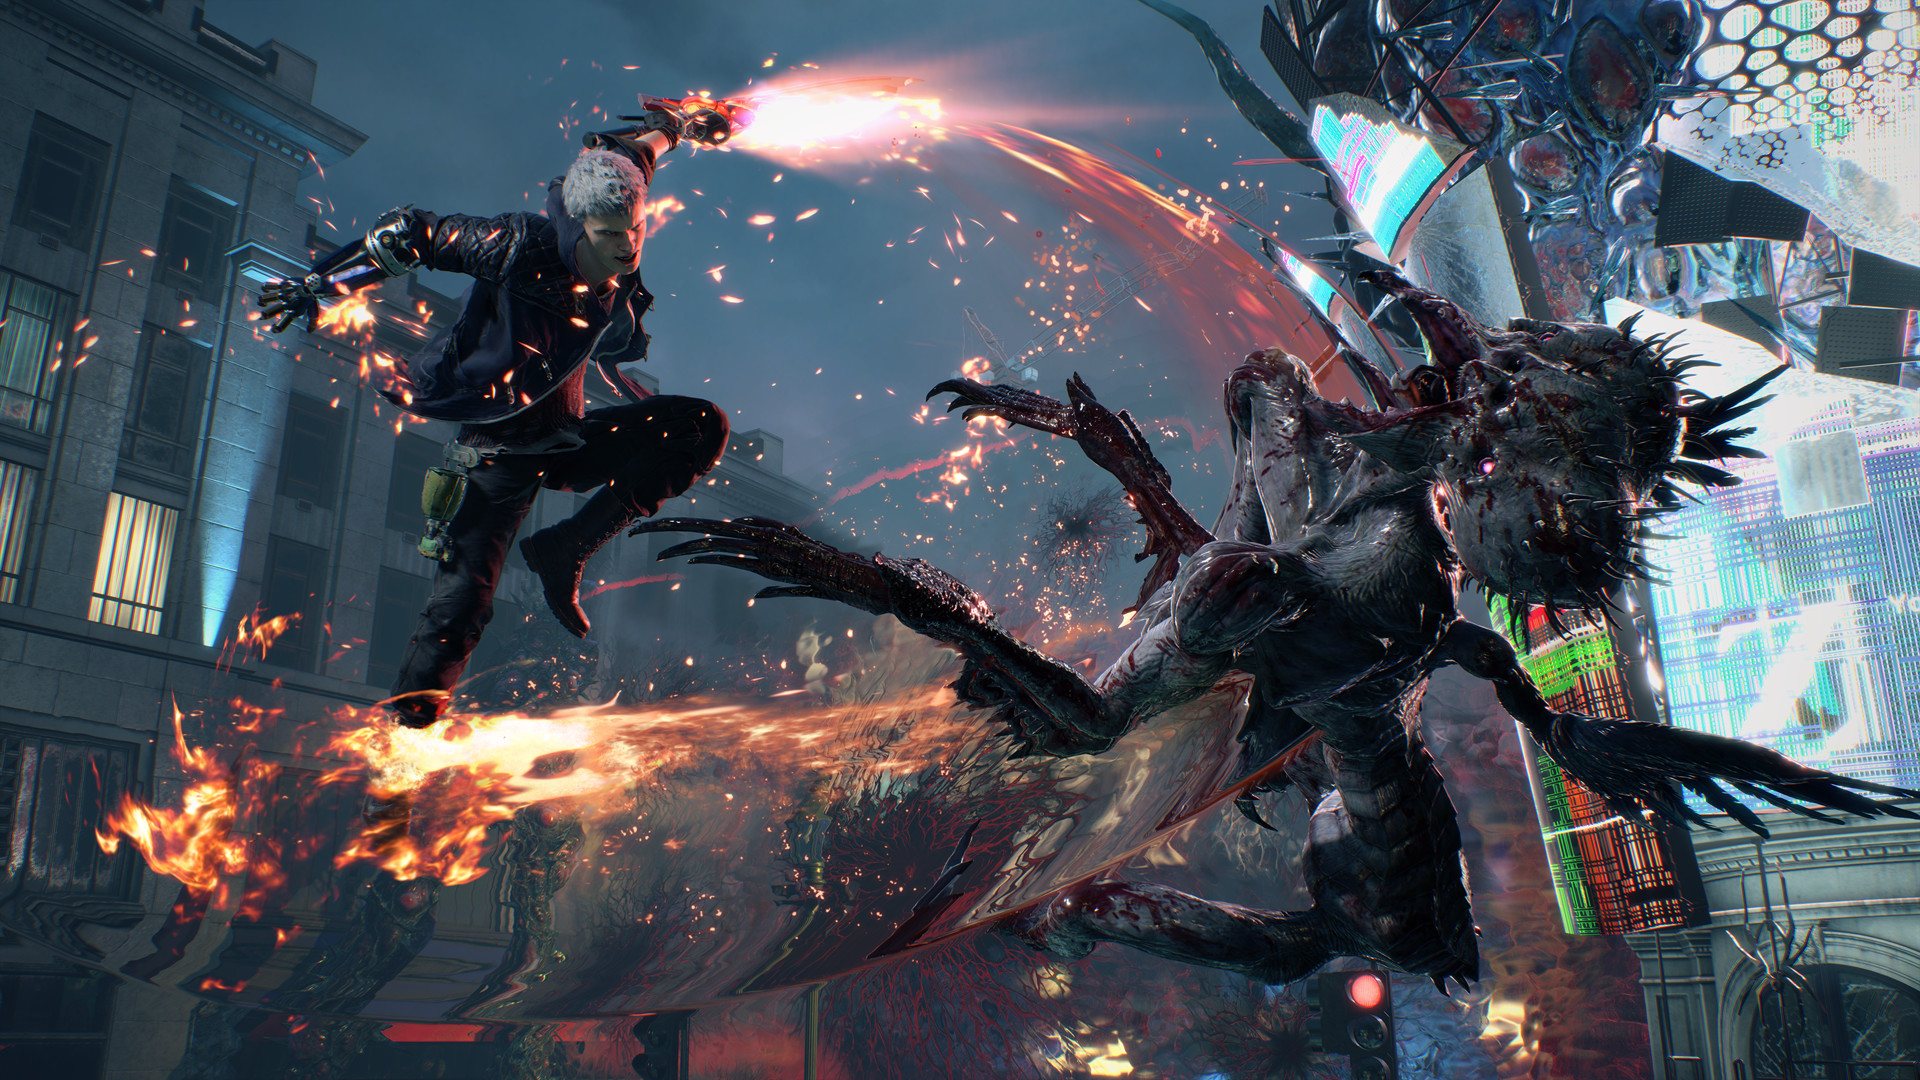 Devil May Cry 5 PlayStation 4 Account Pixelpuffin.net Activation Link